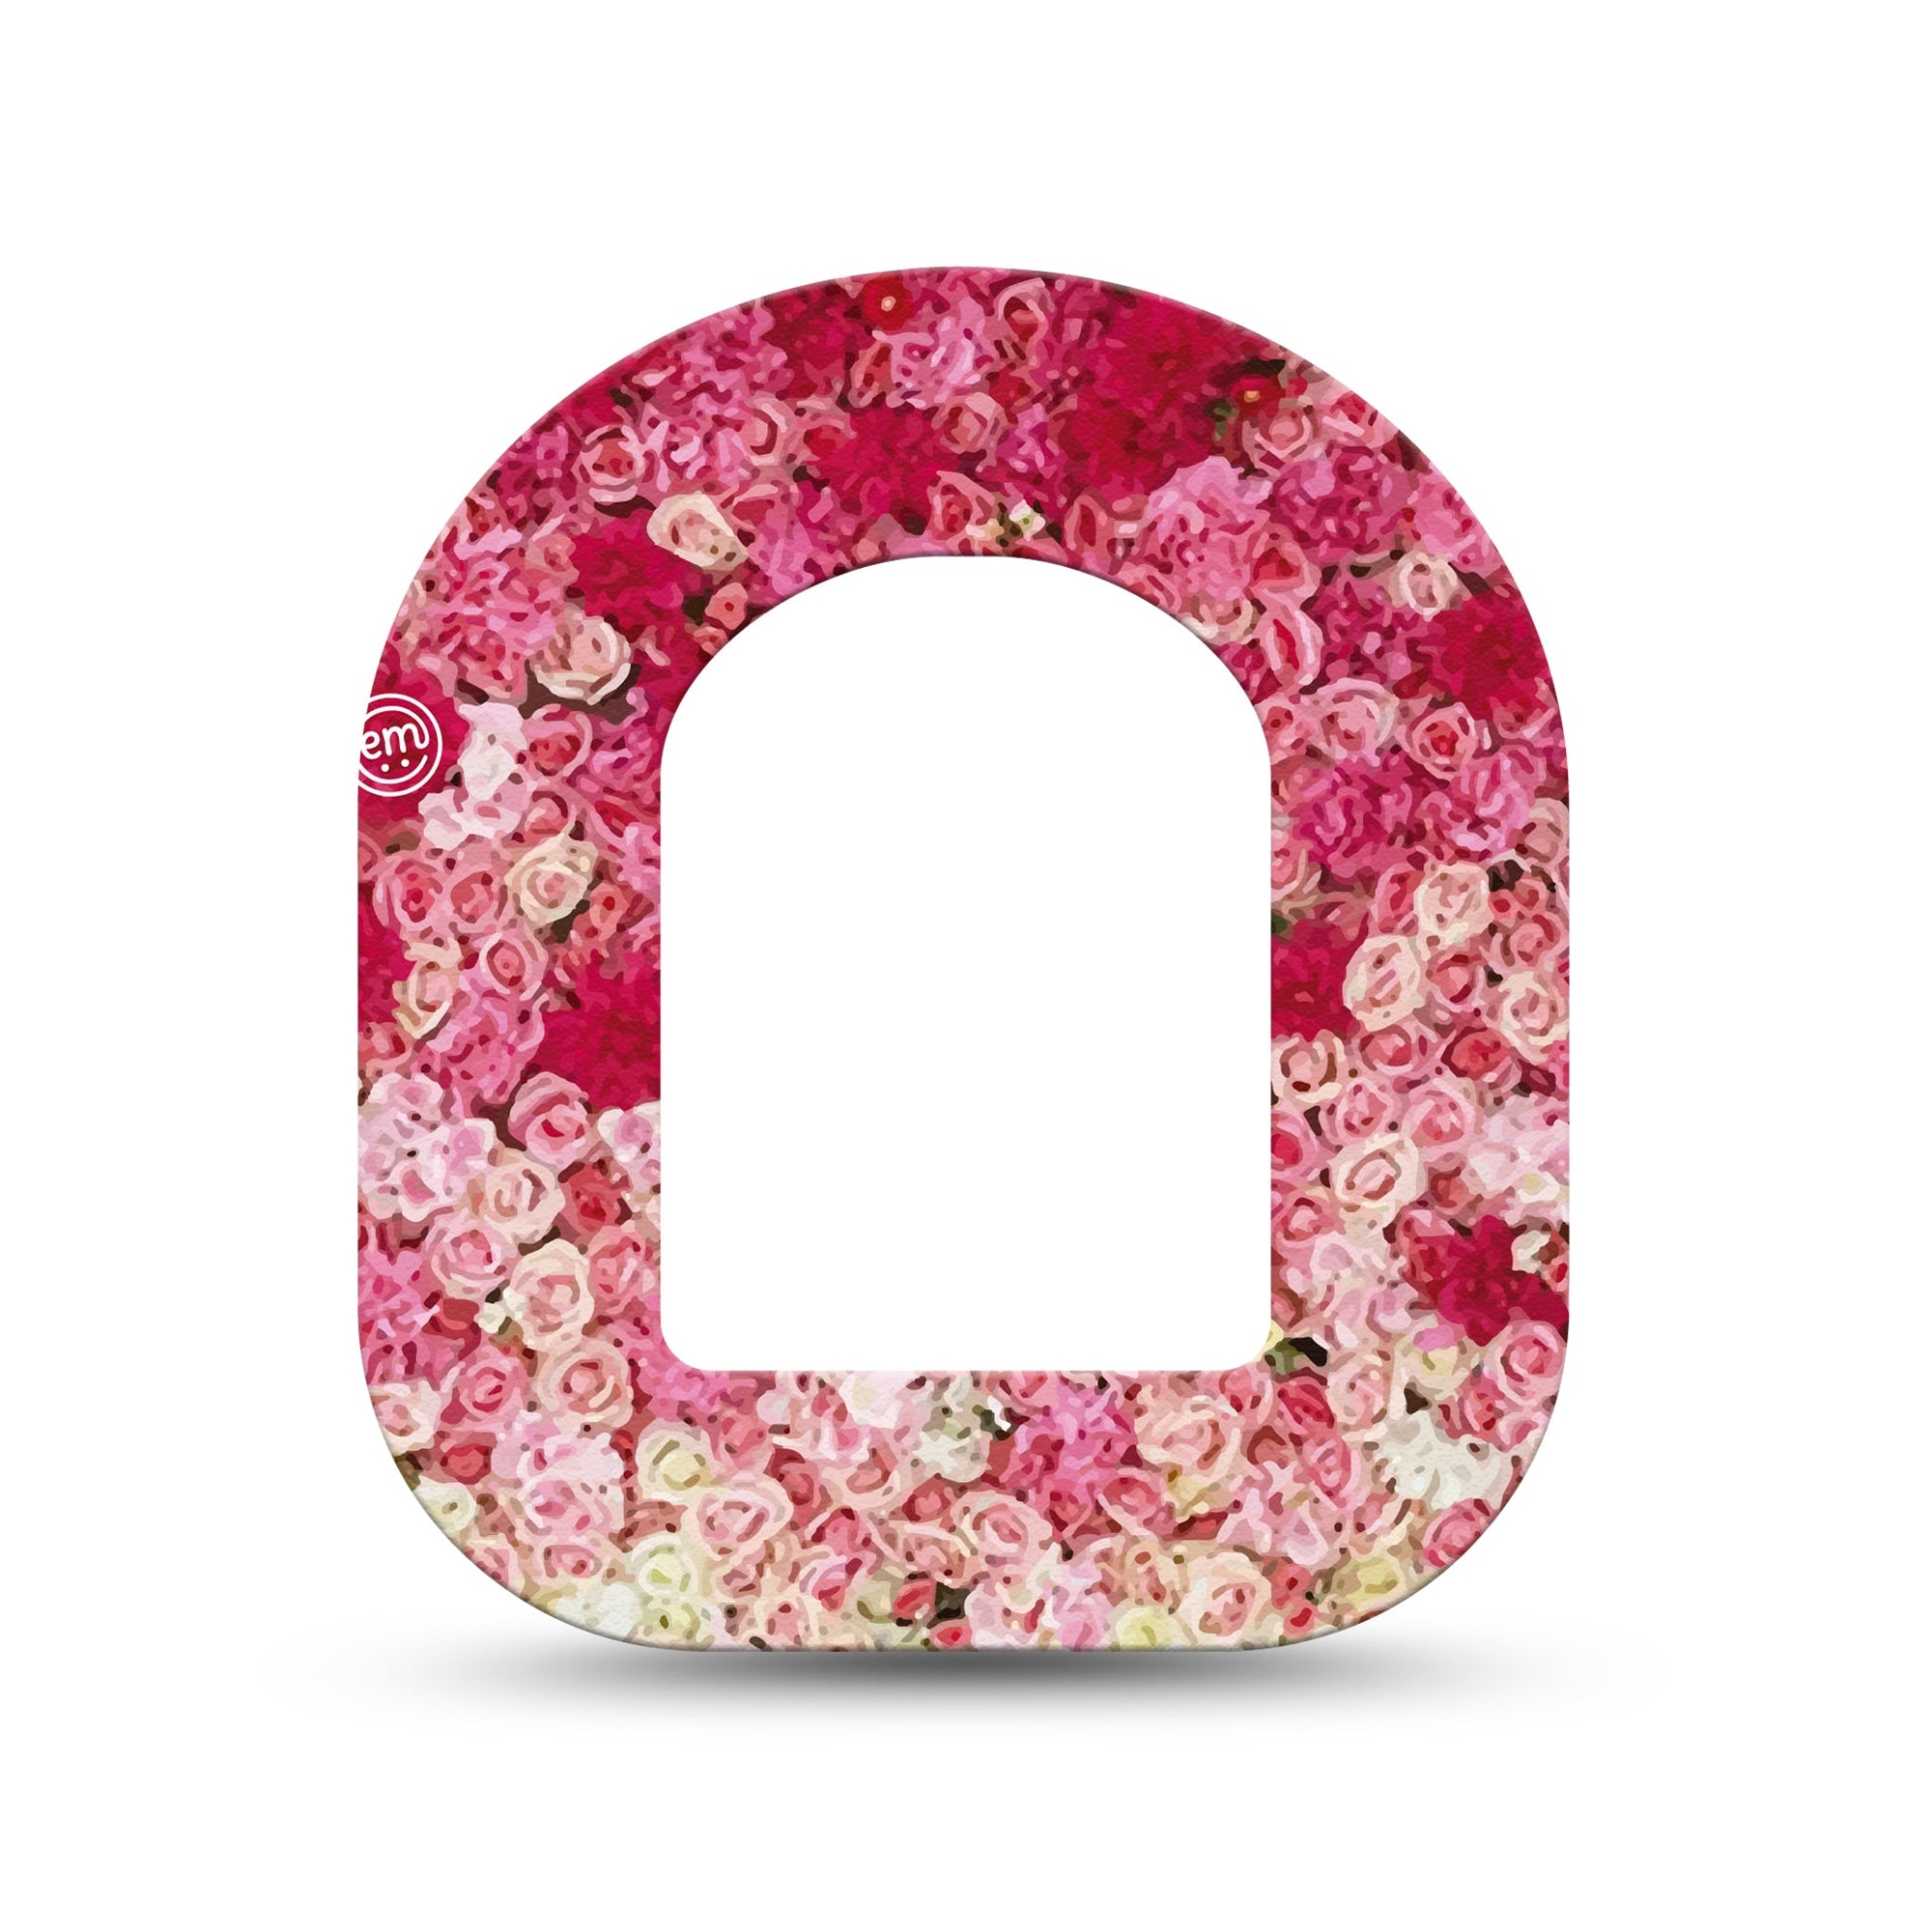 ExpressionMed Flower Wall Pod Mini Tape Single, Floral Decor Adhesive Tape Pump Design